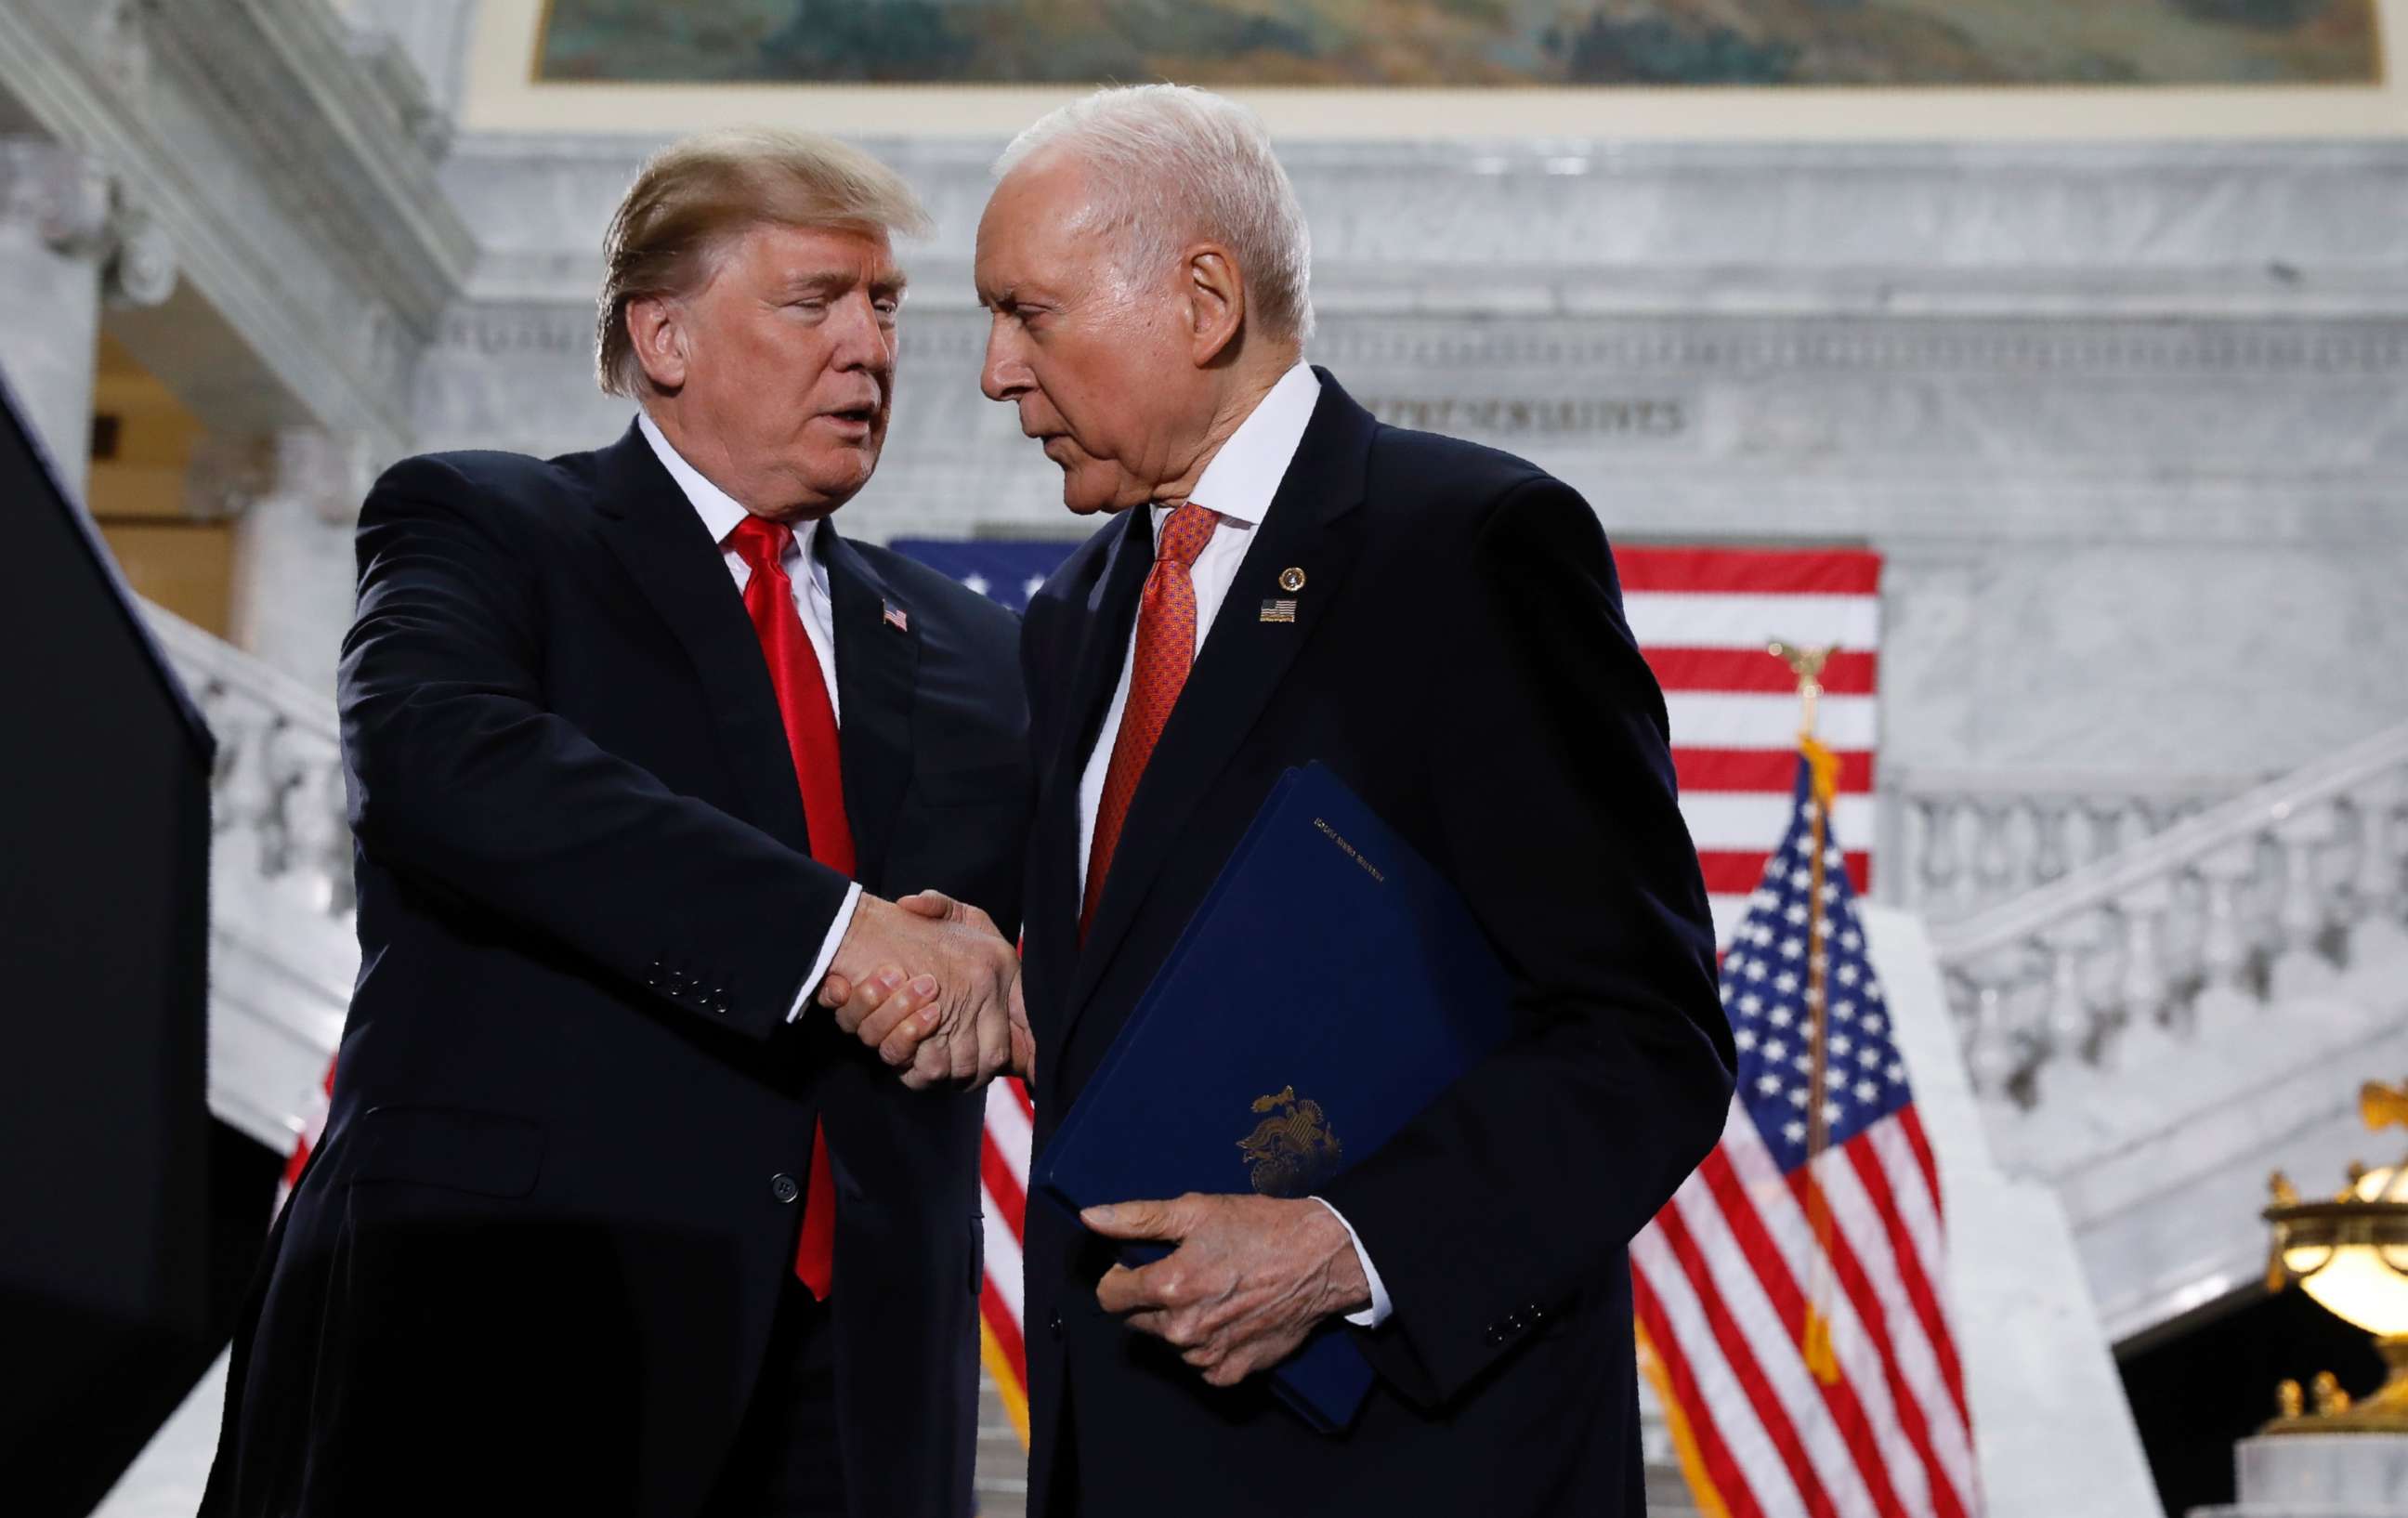 PHOTO: President Donald Trump is greeted by Sen. Orrin Hatch prior to speaking at the Utah State Capitol in Salt Lake City, Dec. 4, 2017.